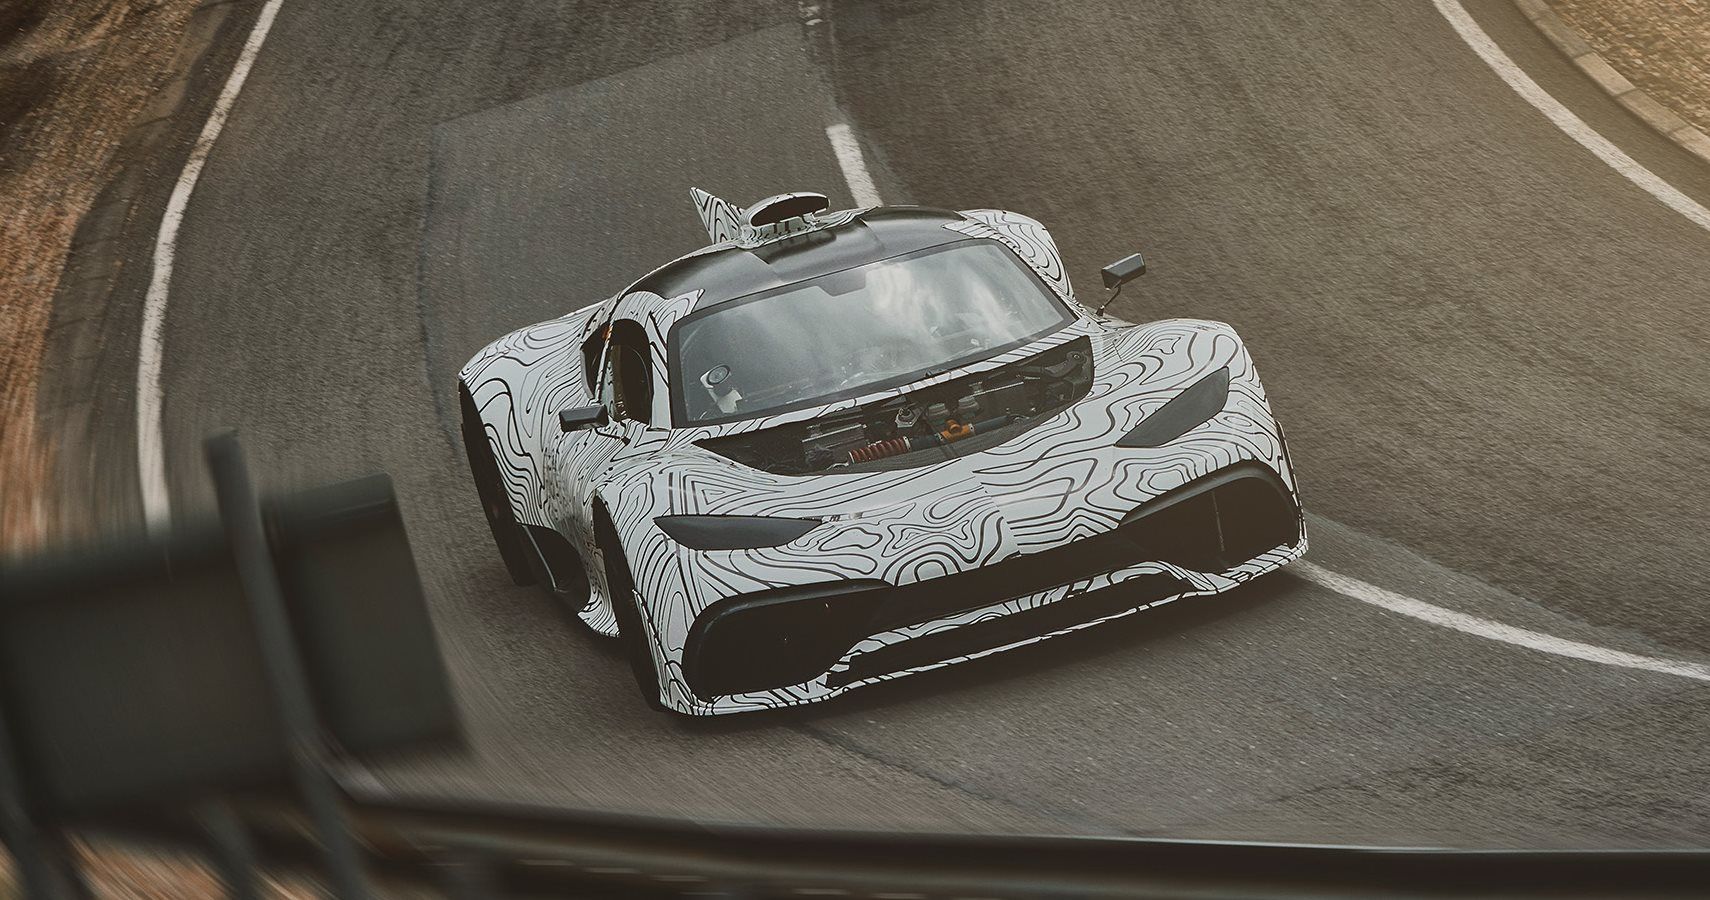 Mercedes Not Eyeing Nürburgring Lap Record With AMG One